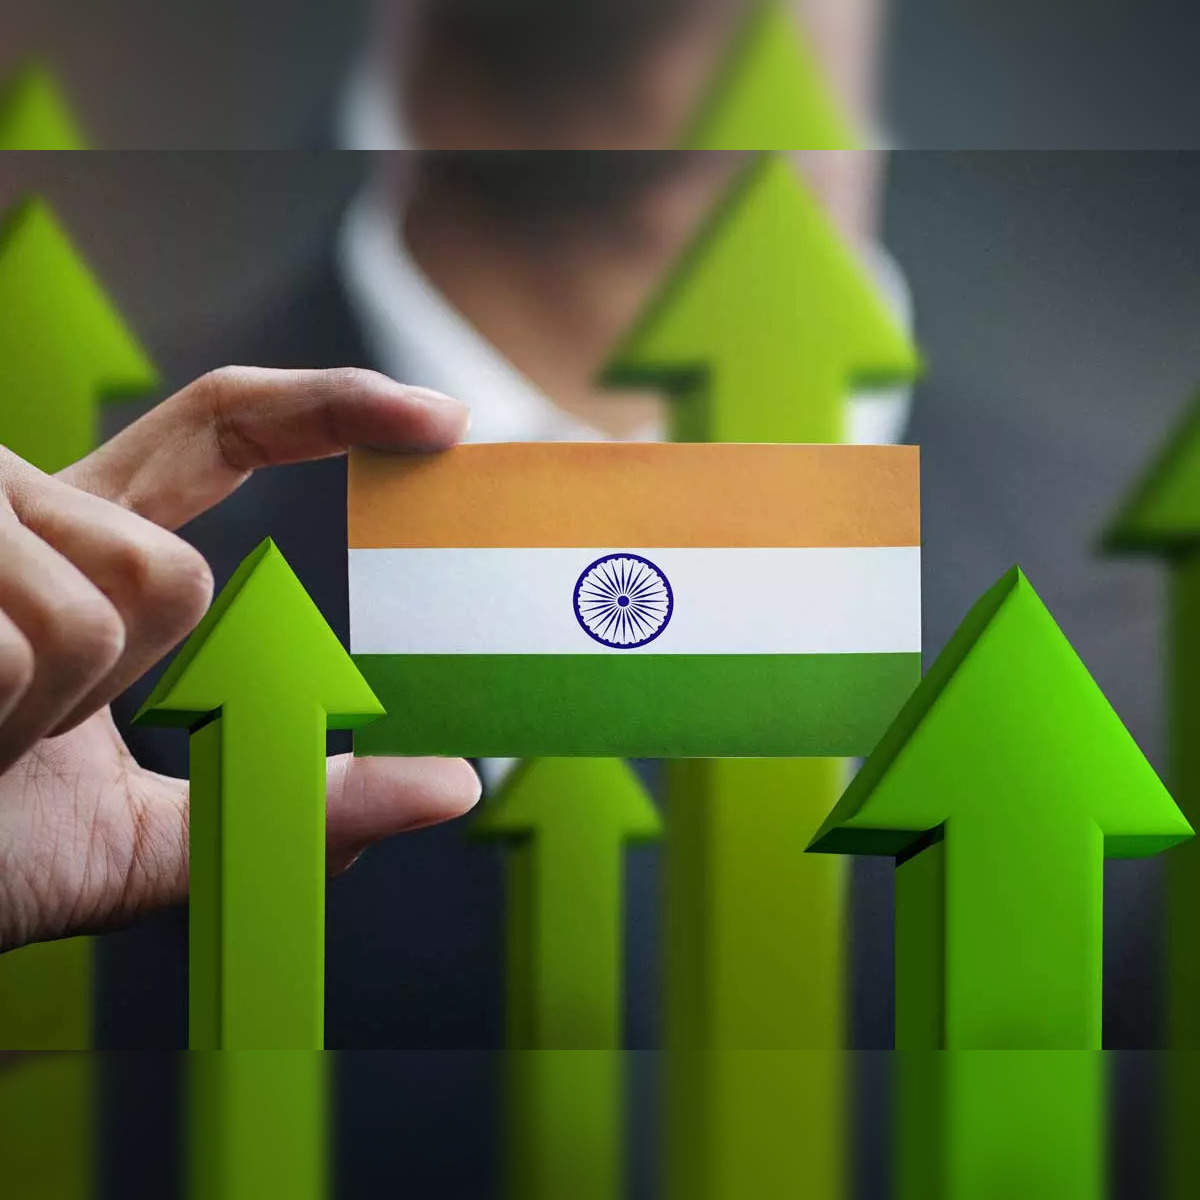 India economy news: Indian economy poised for further growth in 2023  despite global headwinds - The Economic Times